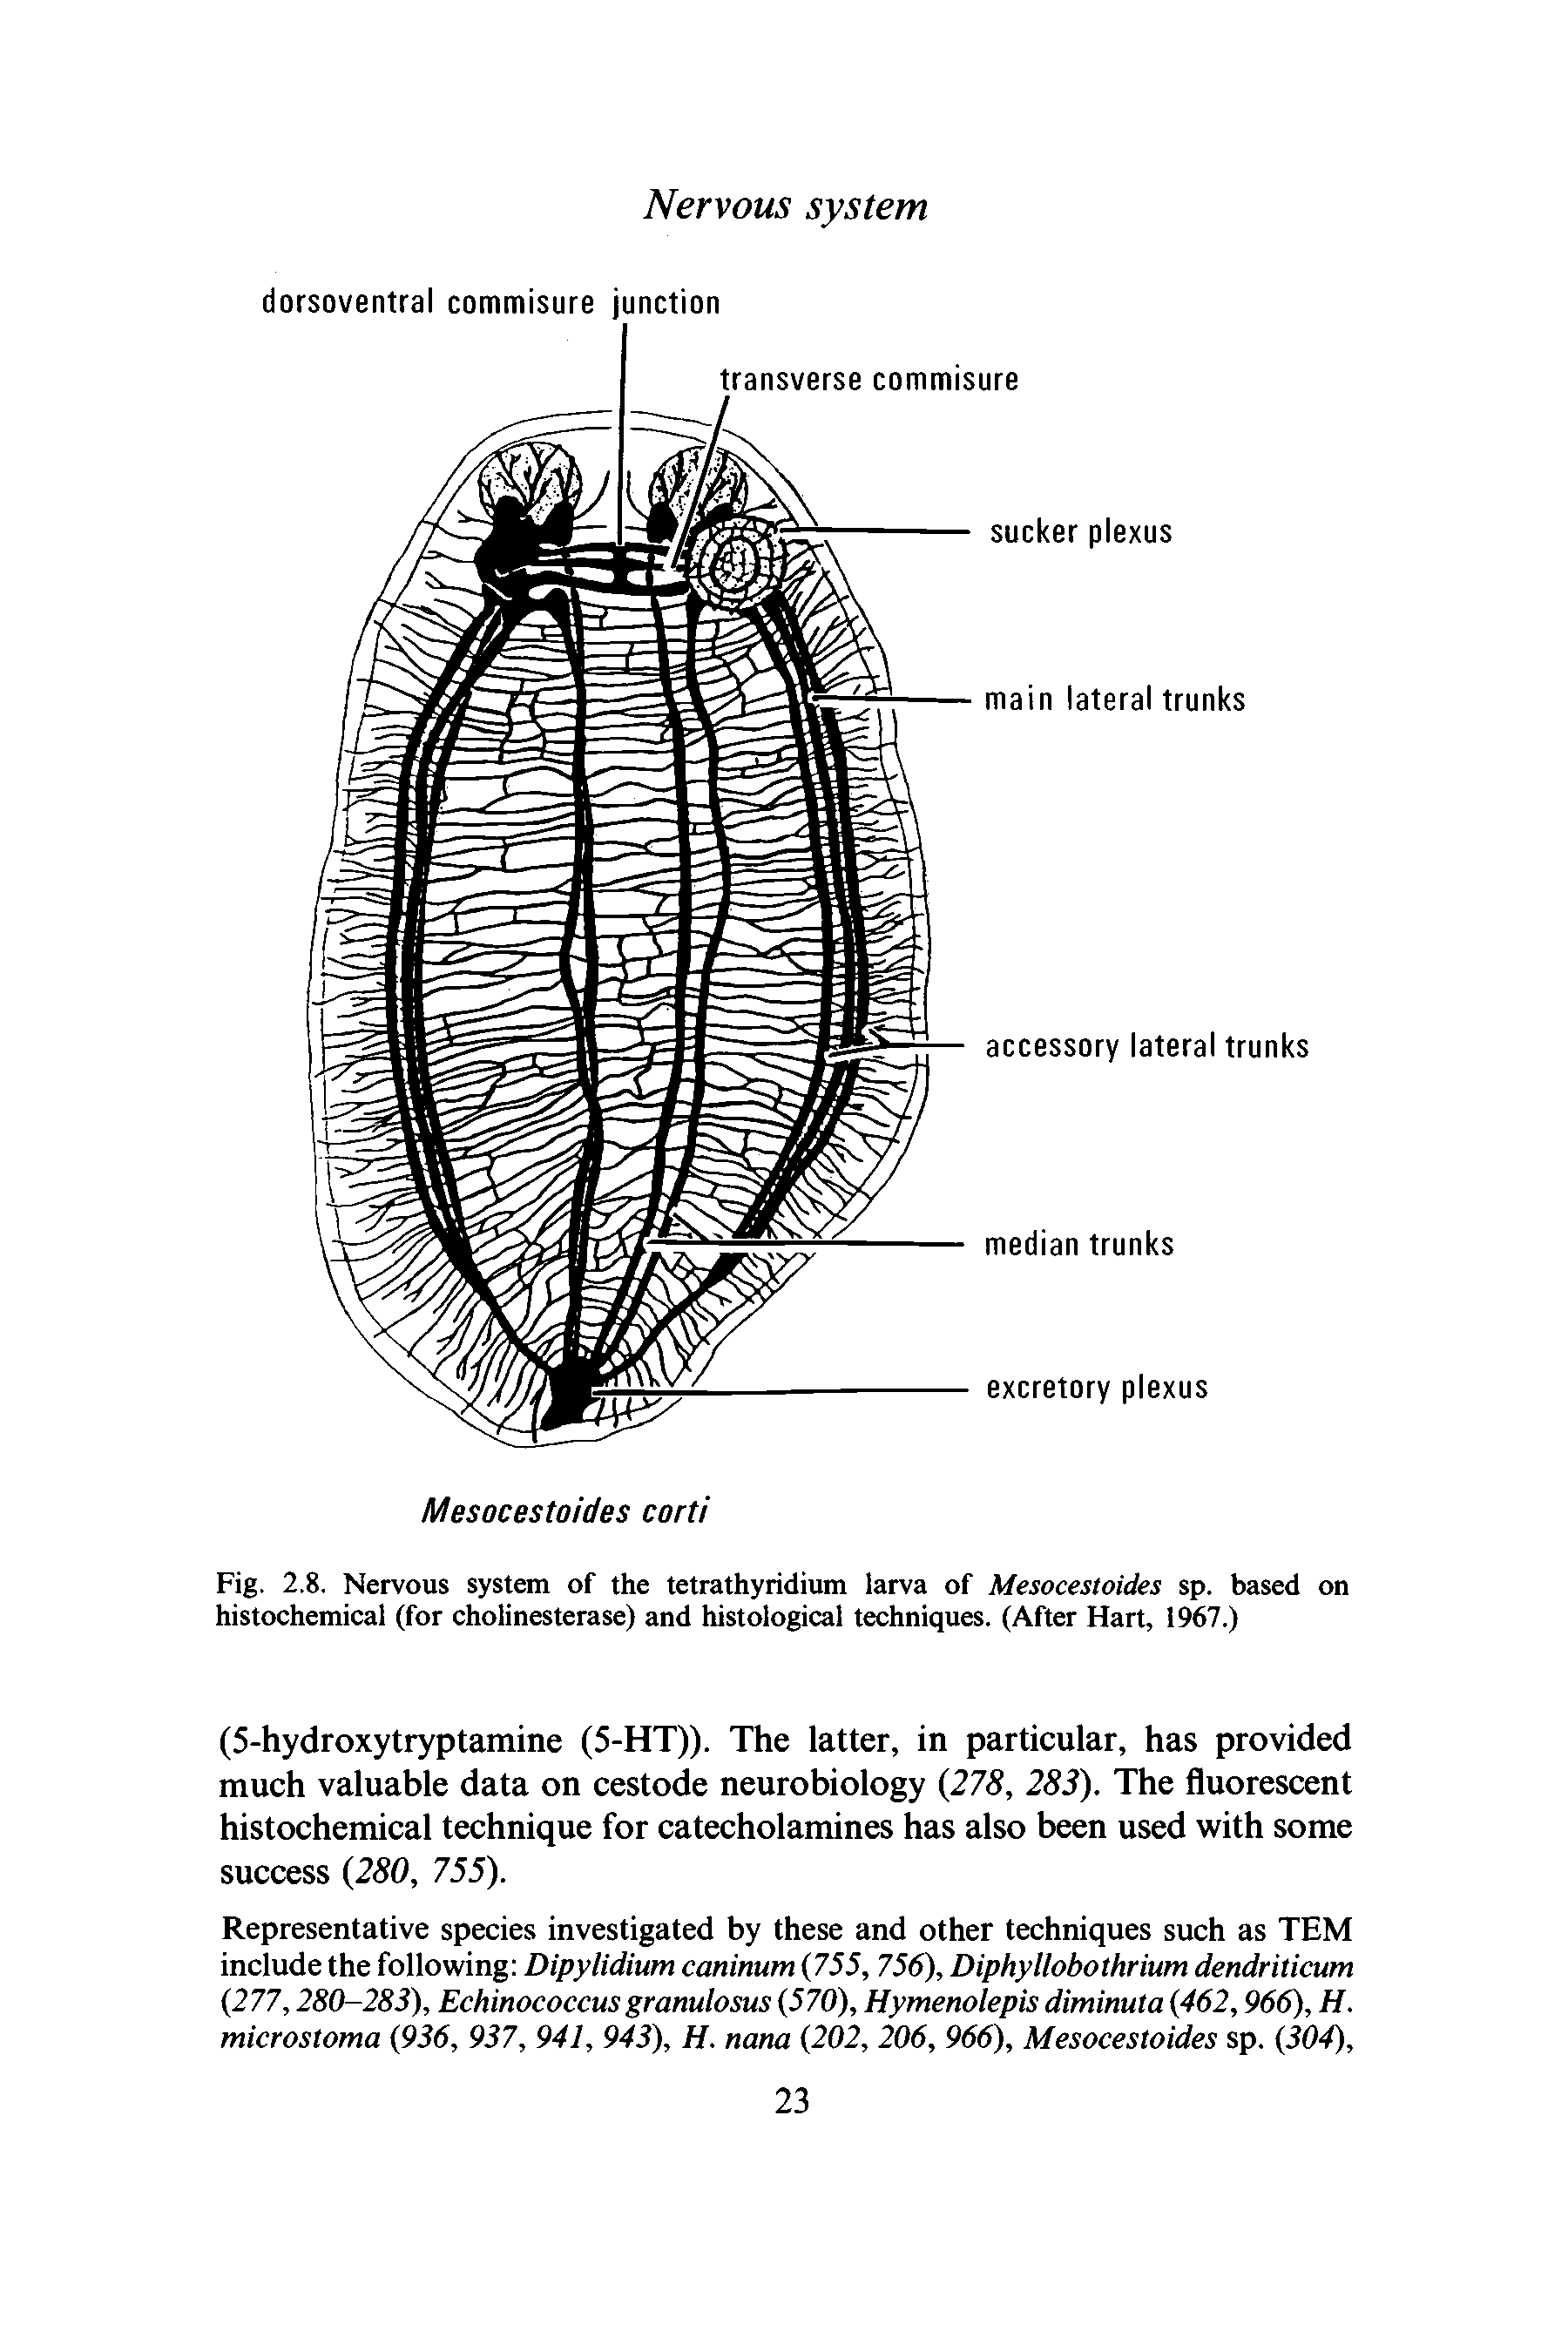 Fig. 2.8. Nervous system of the tetrathyridium larva of Mesocestoides sp. based on histochemical (for cholinesterase) and histological techniques. (After Hart, 1967.)...